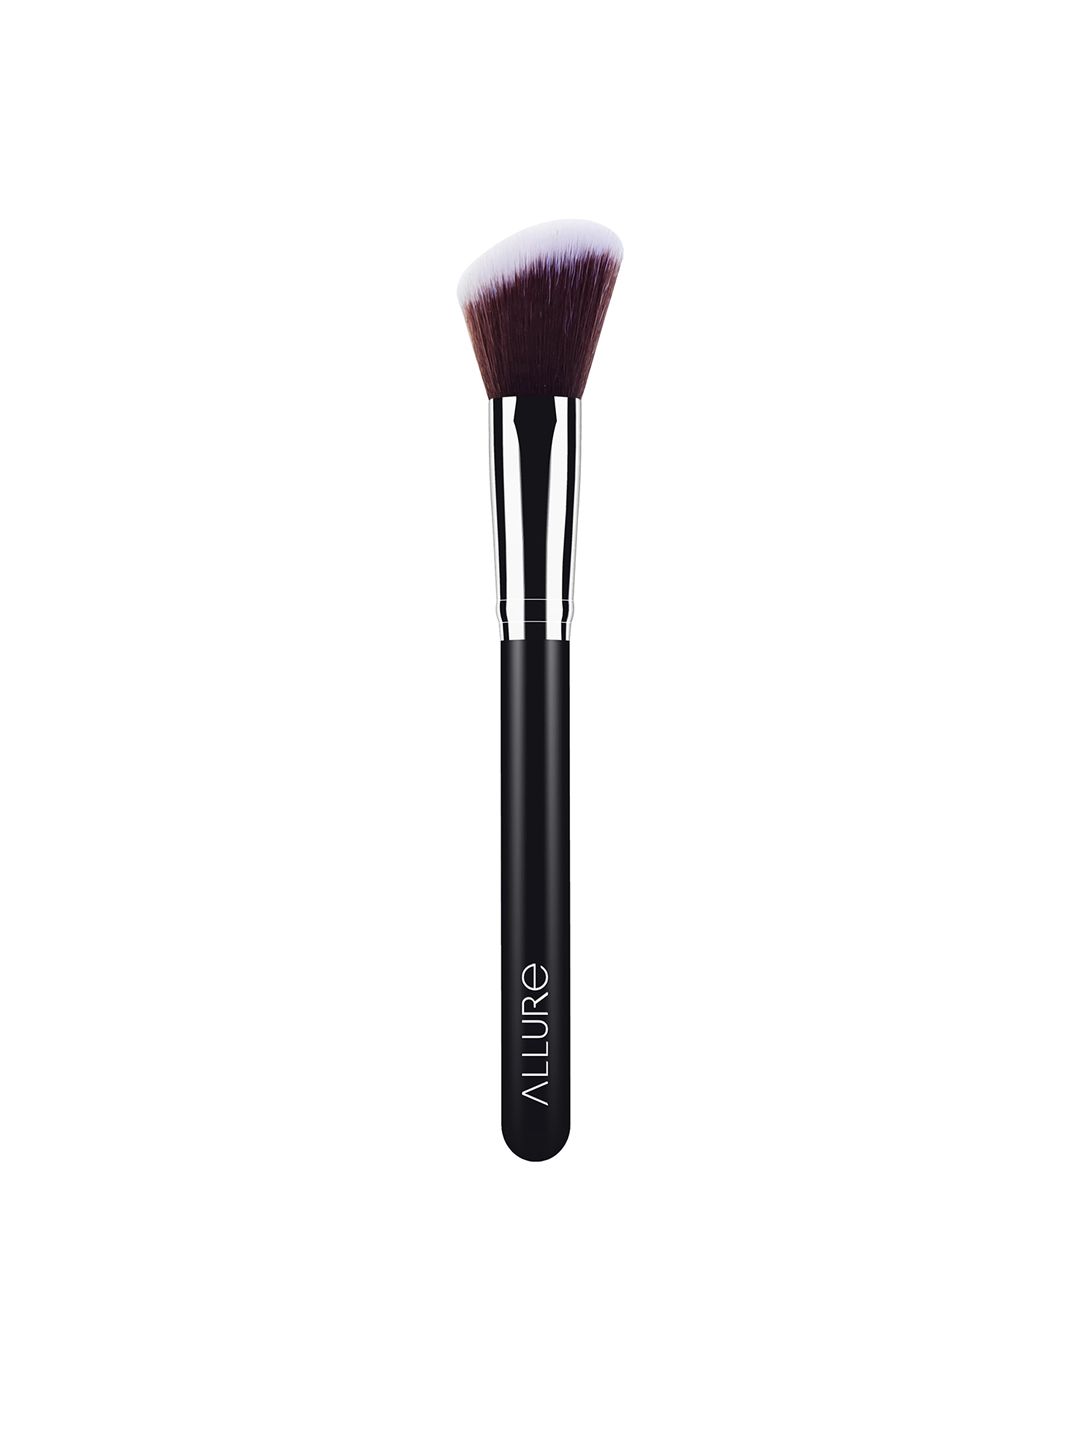 ALLURE Professional Angle Contour Makeup Brush SSK-126 Price in India